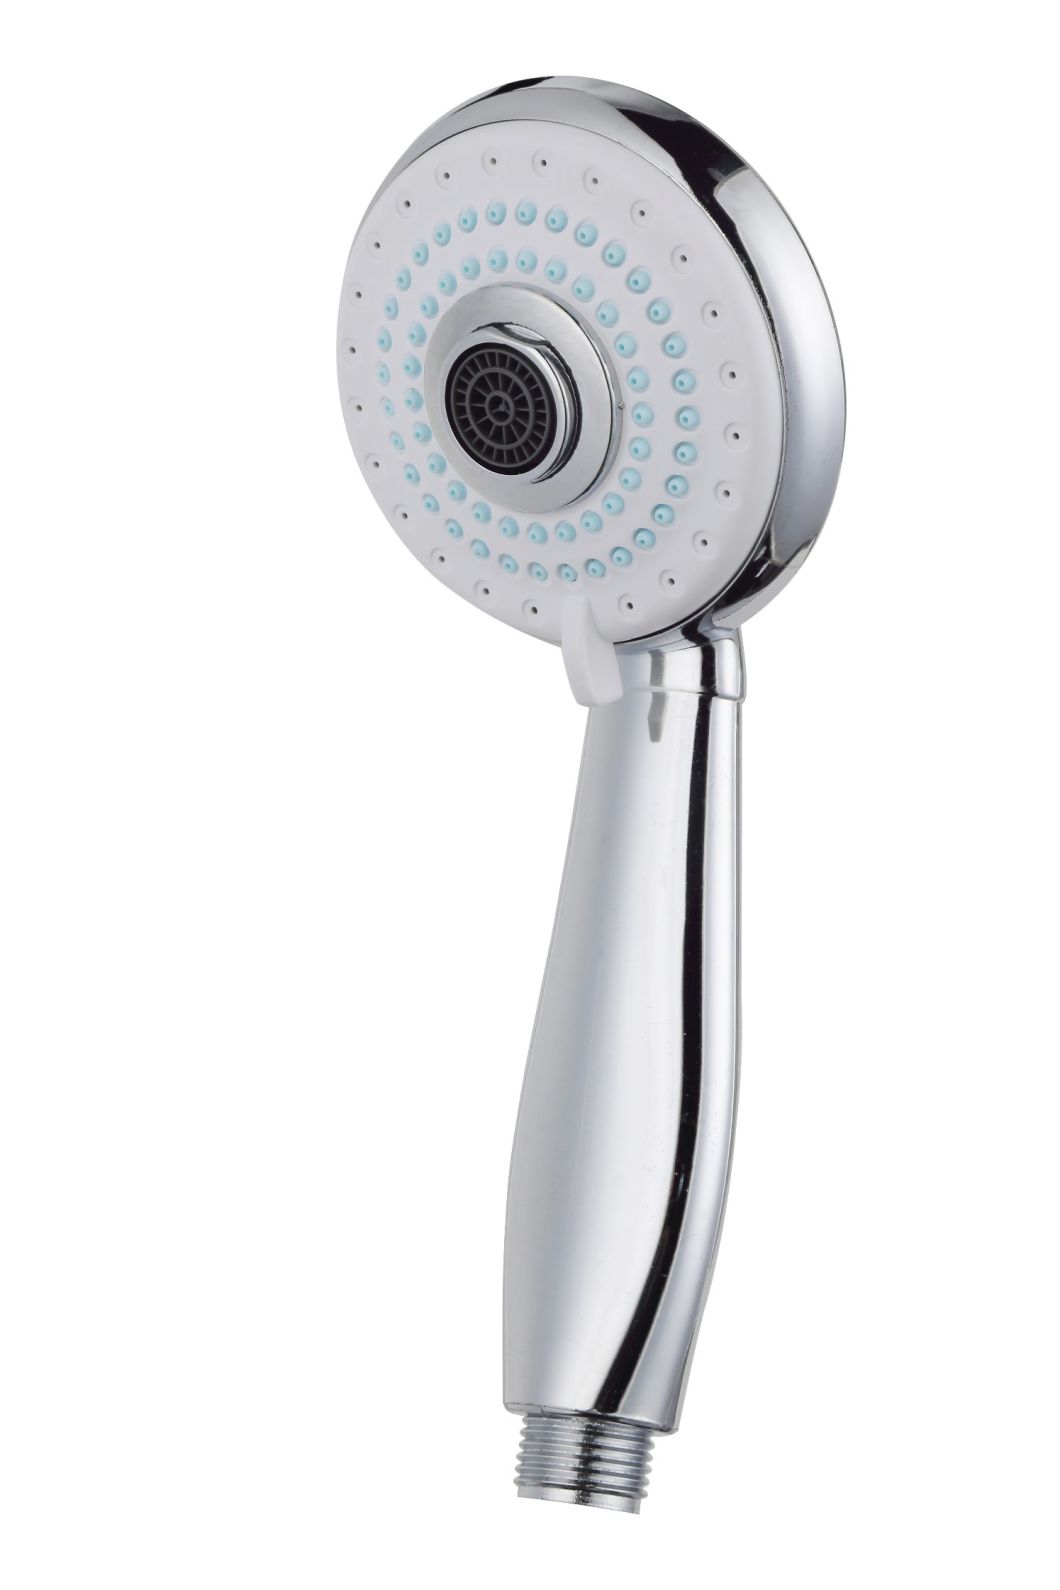 Hot Sell Hand Held Shower Head Made in China Lm-3012gh